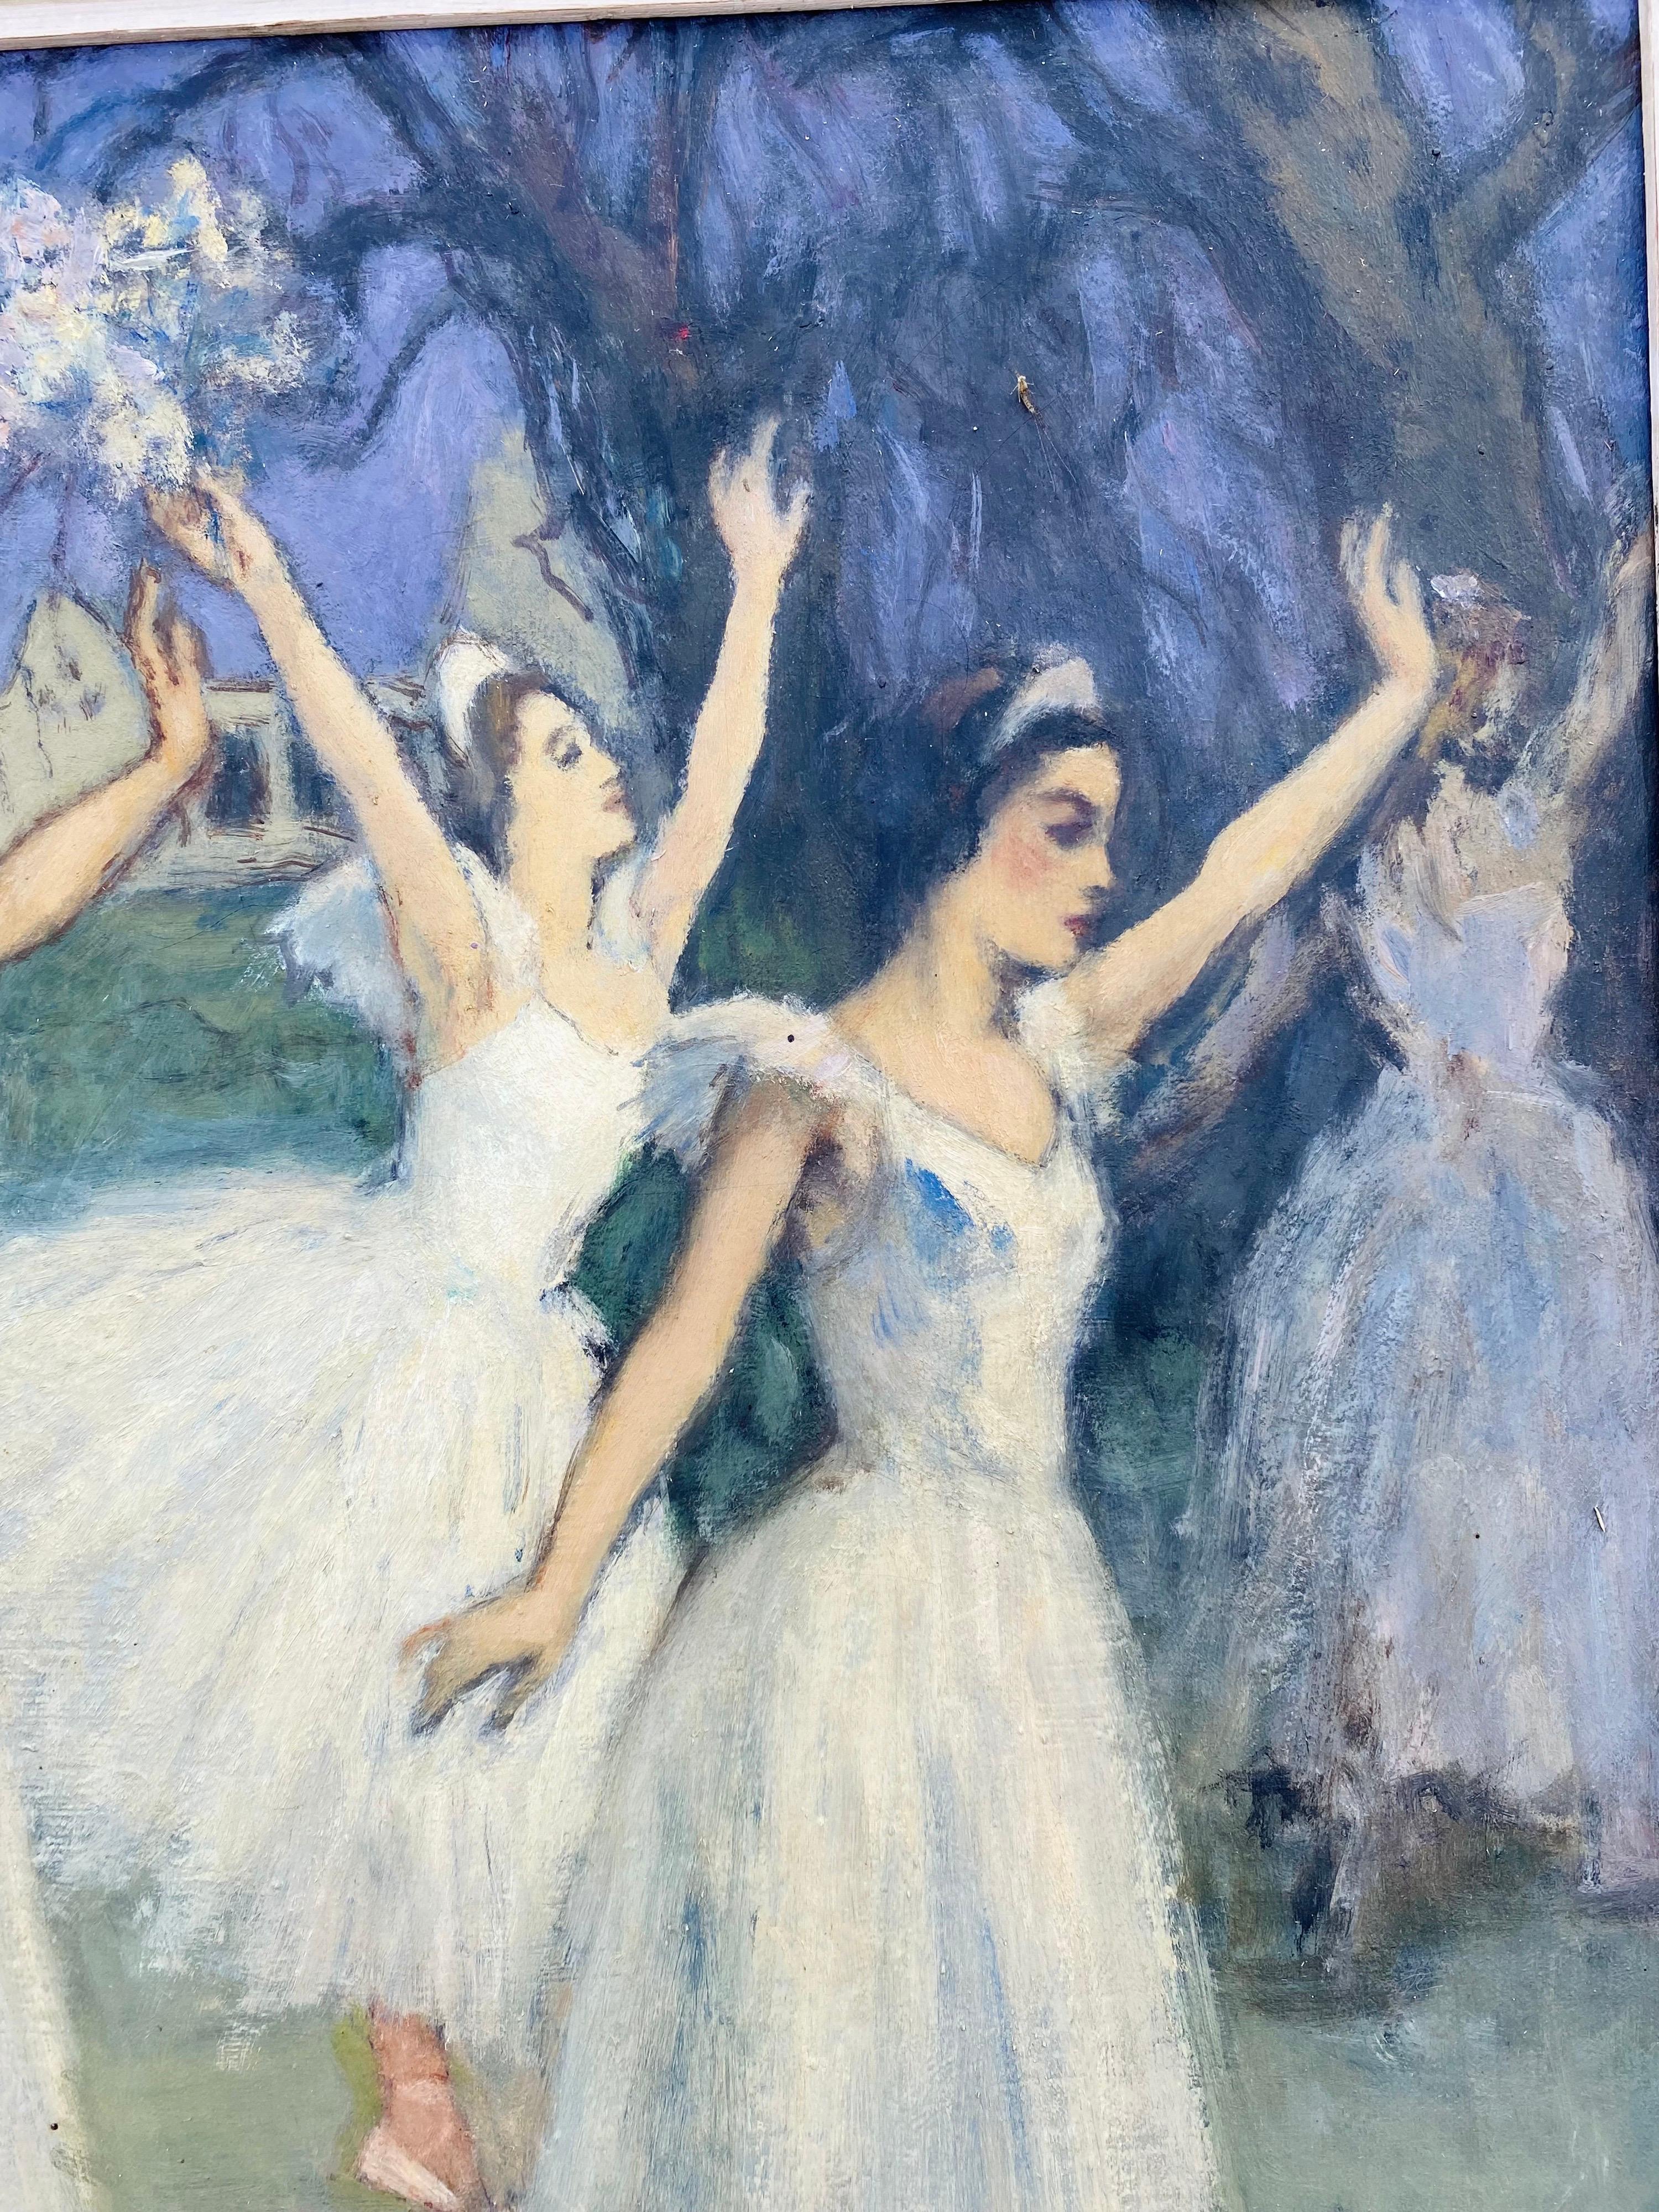 French 19th century style impressionist painting - Ballet - Dance Dancers Degas - Impressionist Painting by Charles Emmanuel Jodelet